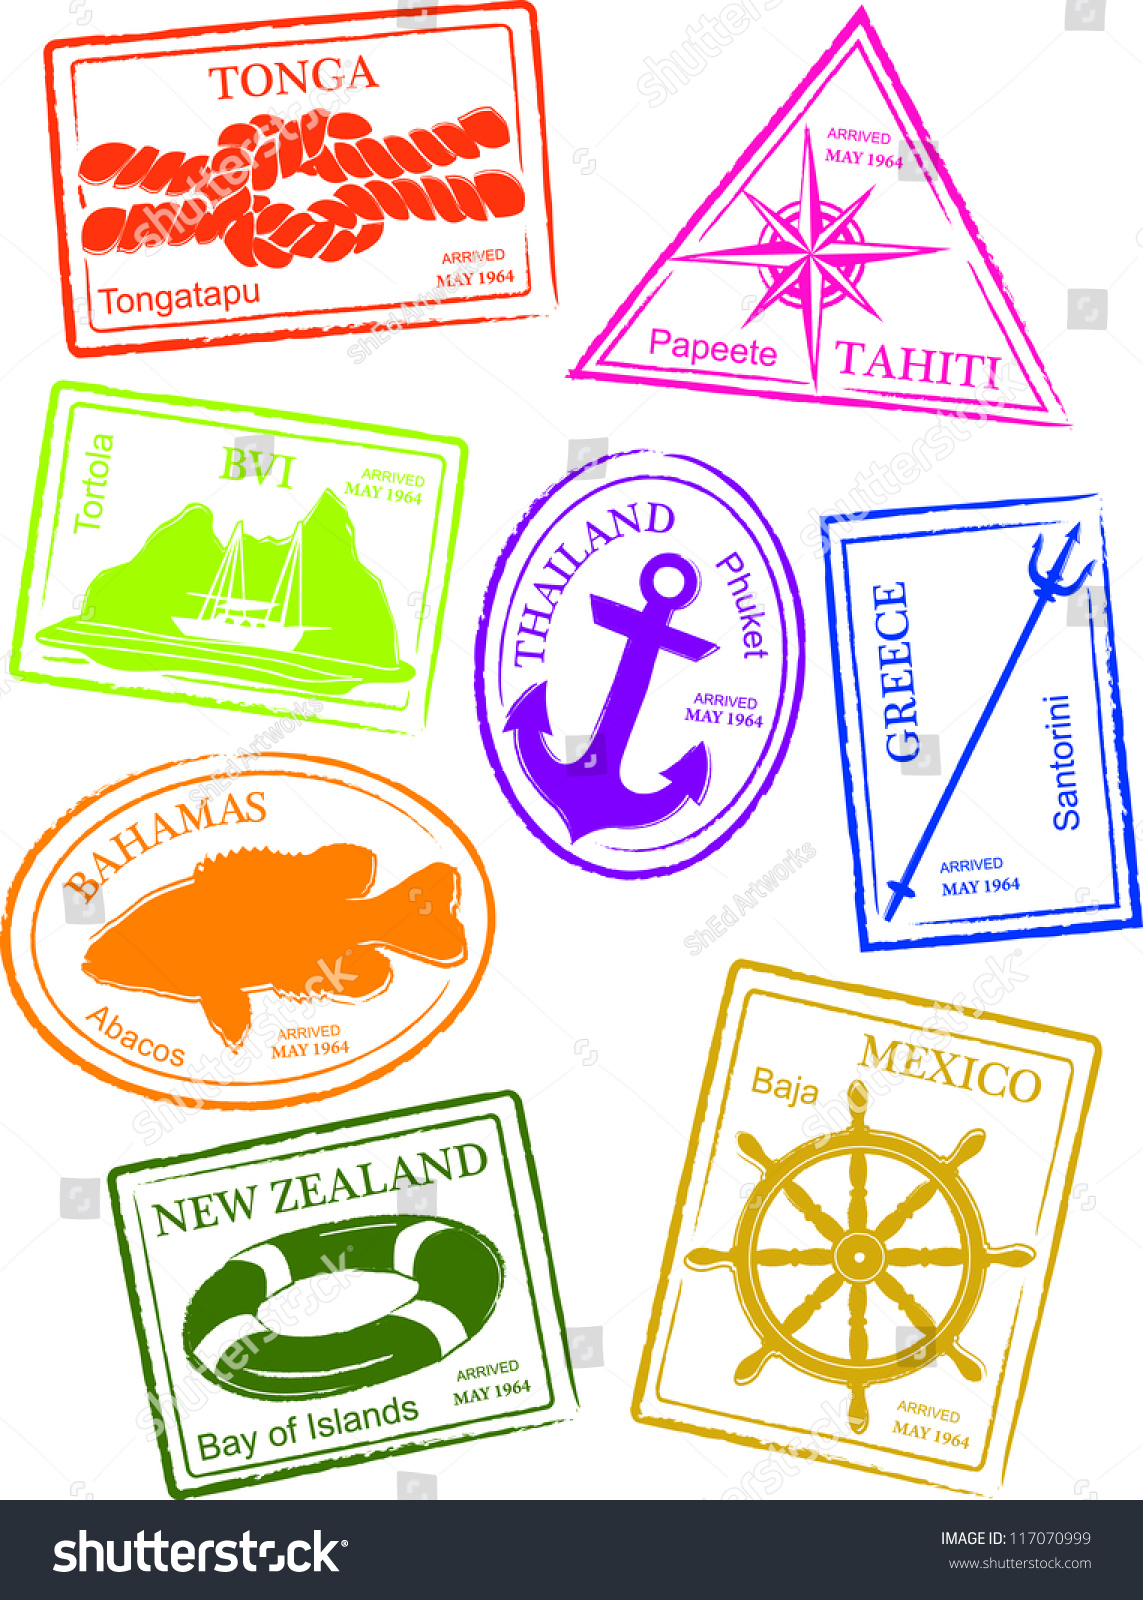 travel stamps clipart free - photo #36